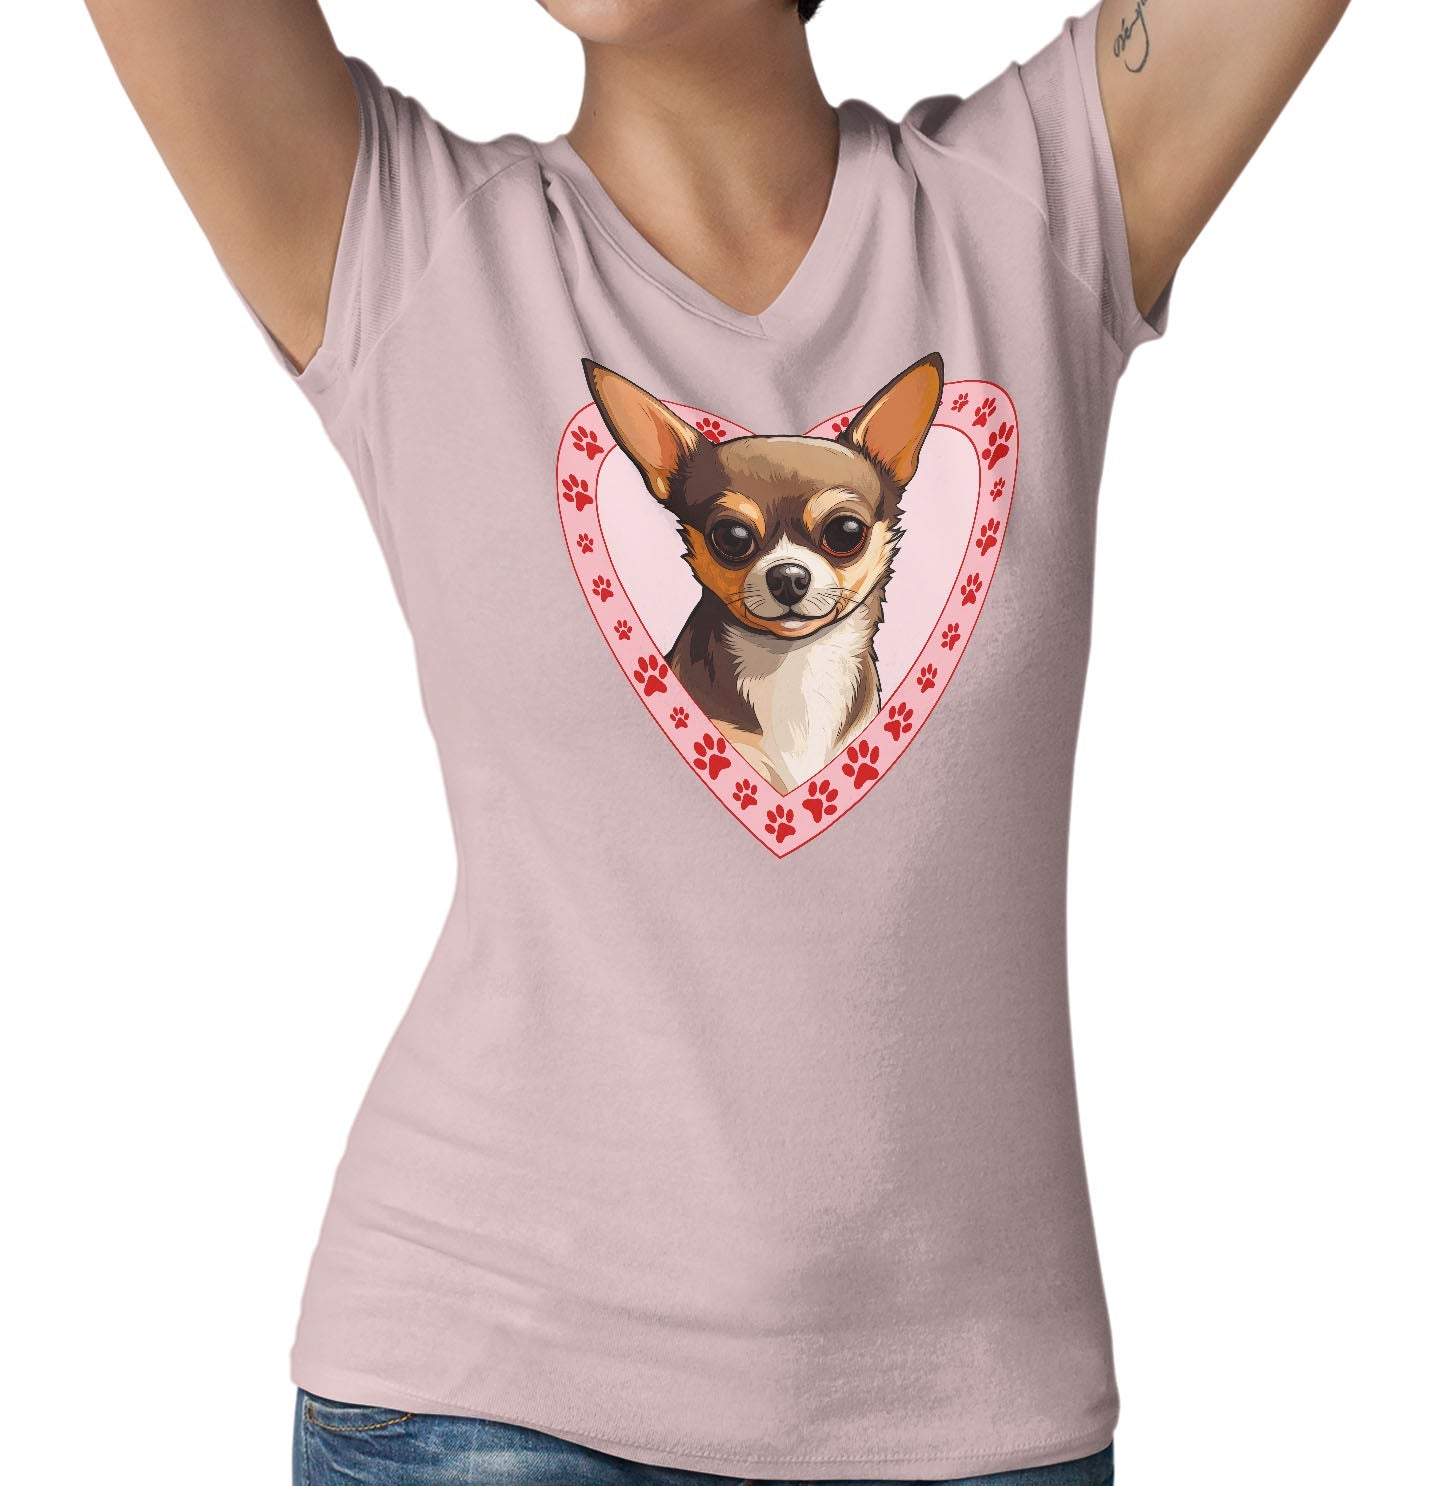 Chihuahua (Chocolate & Tan) Illustration In Heart - Women's V-Neck T-Shirt